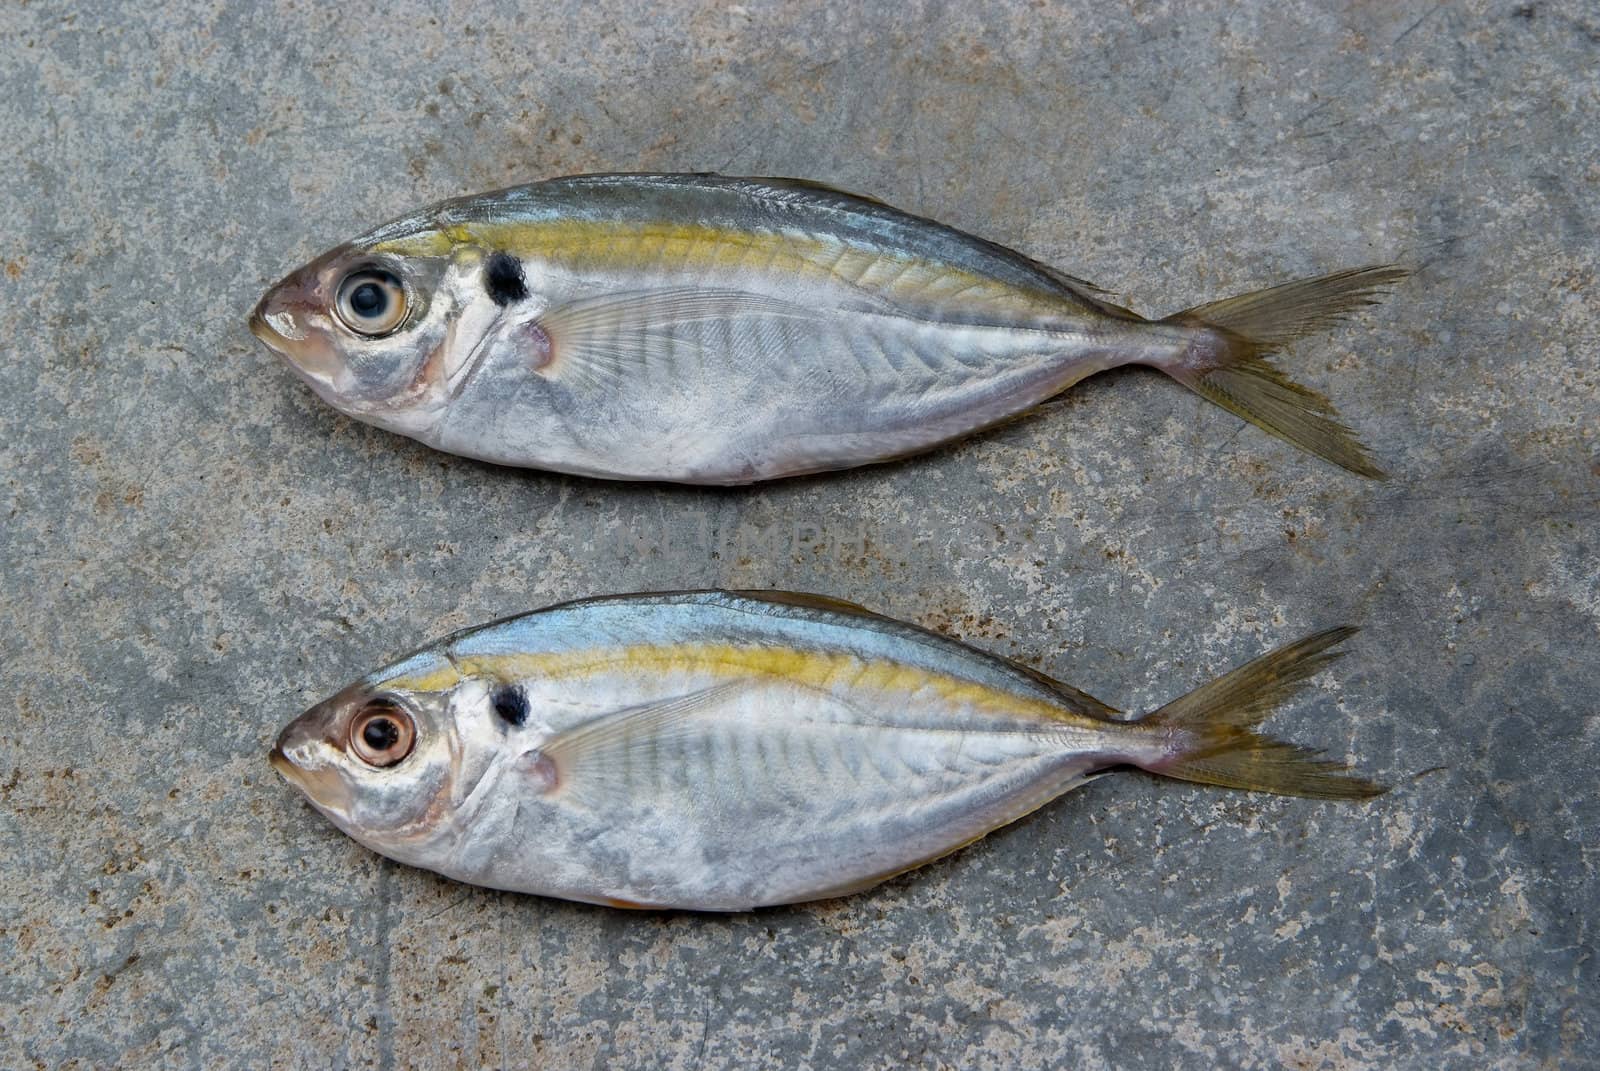 The yellow stripe trevally fish on the texture of the concrete.